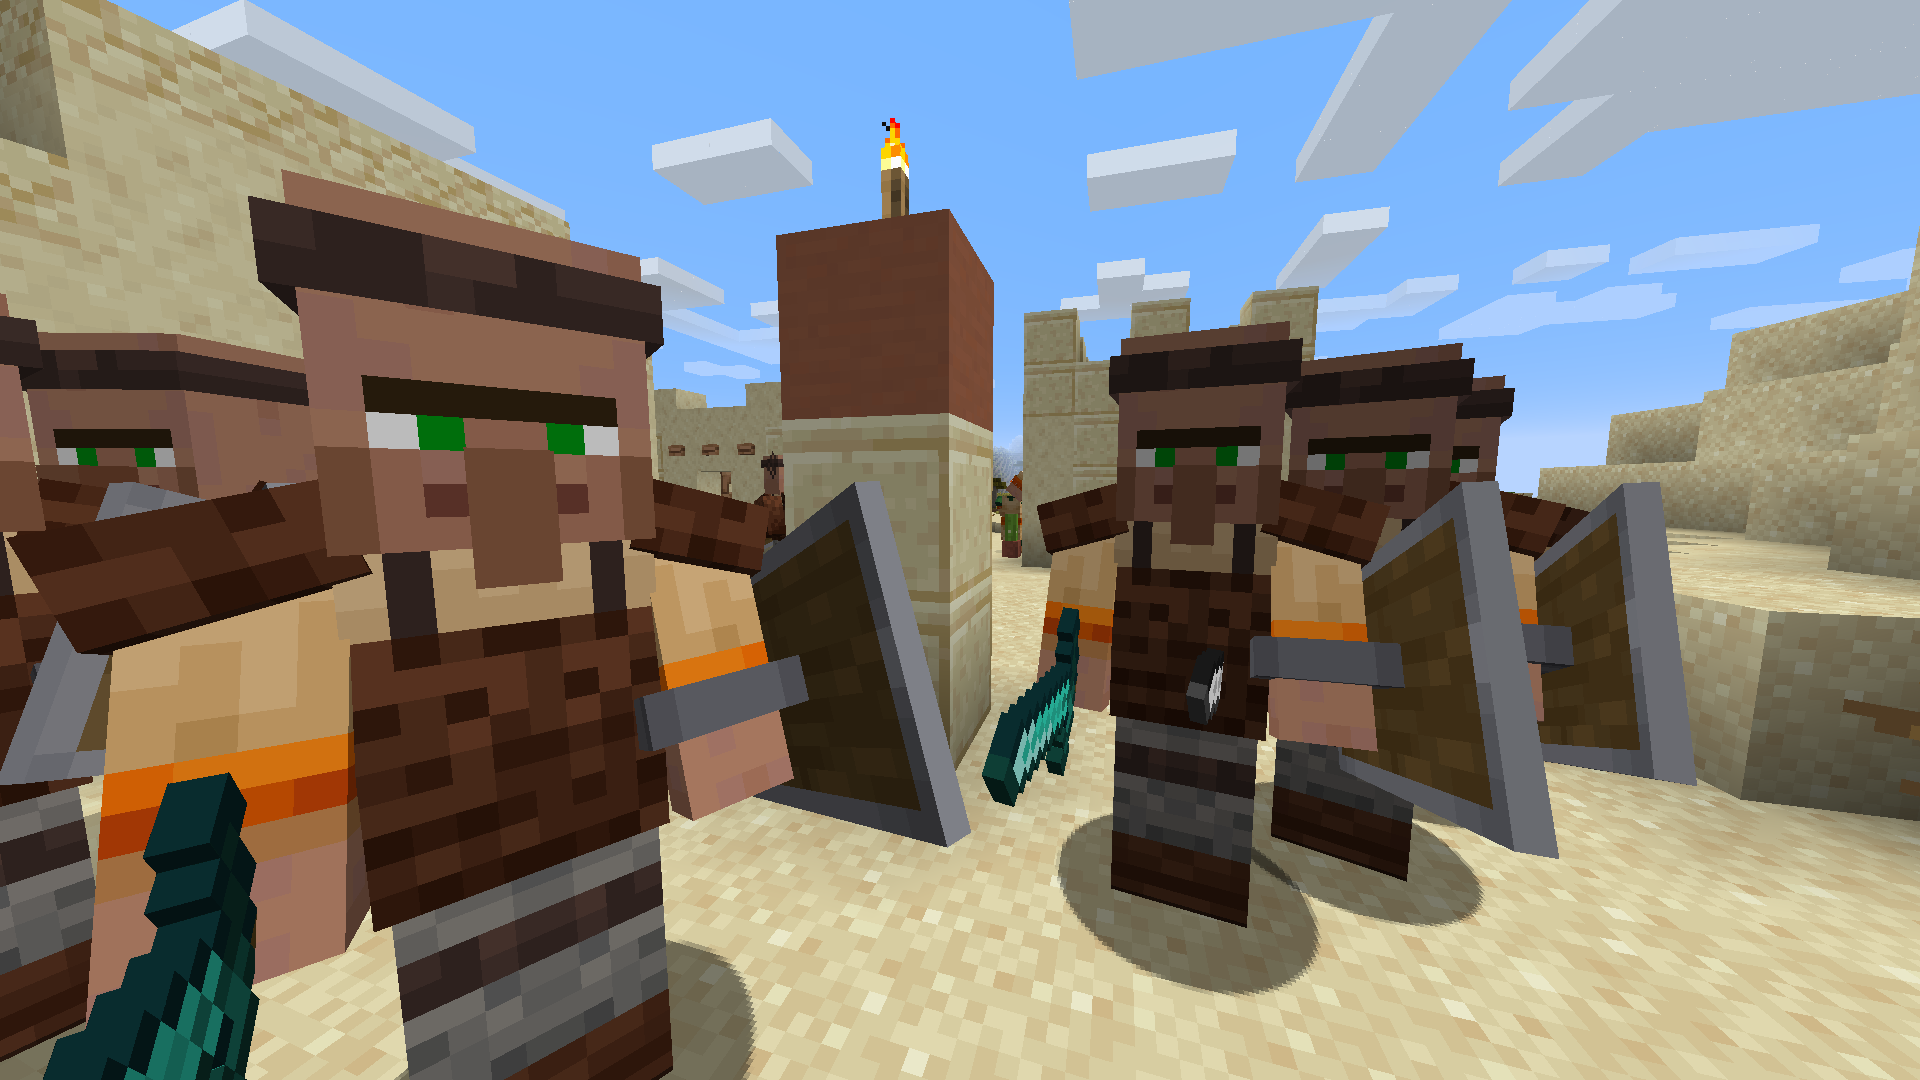 Guard Villager1.12.2. Guard Villagers 1.16.5. Мод Guard Villagers. Guard Villagers Mod 1.12.2. Better village 1.16 5